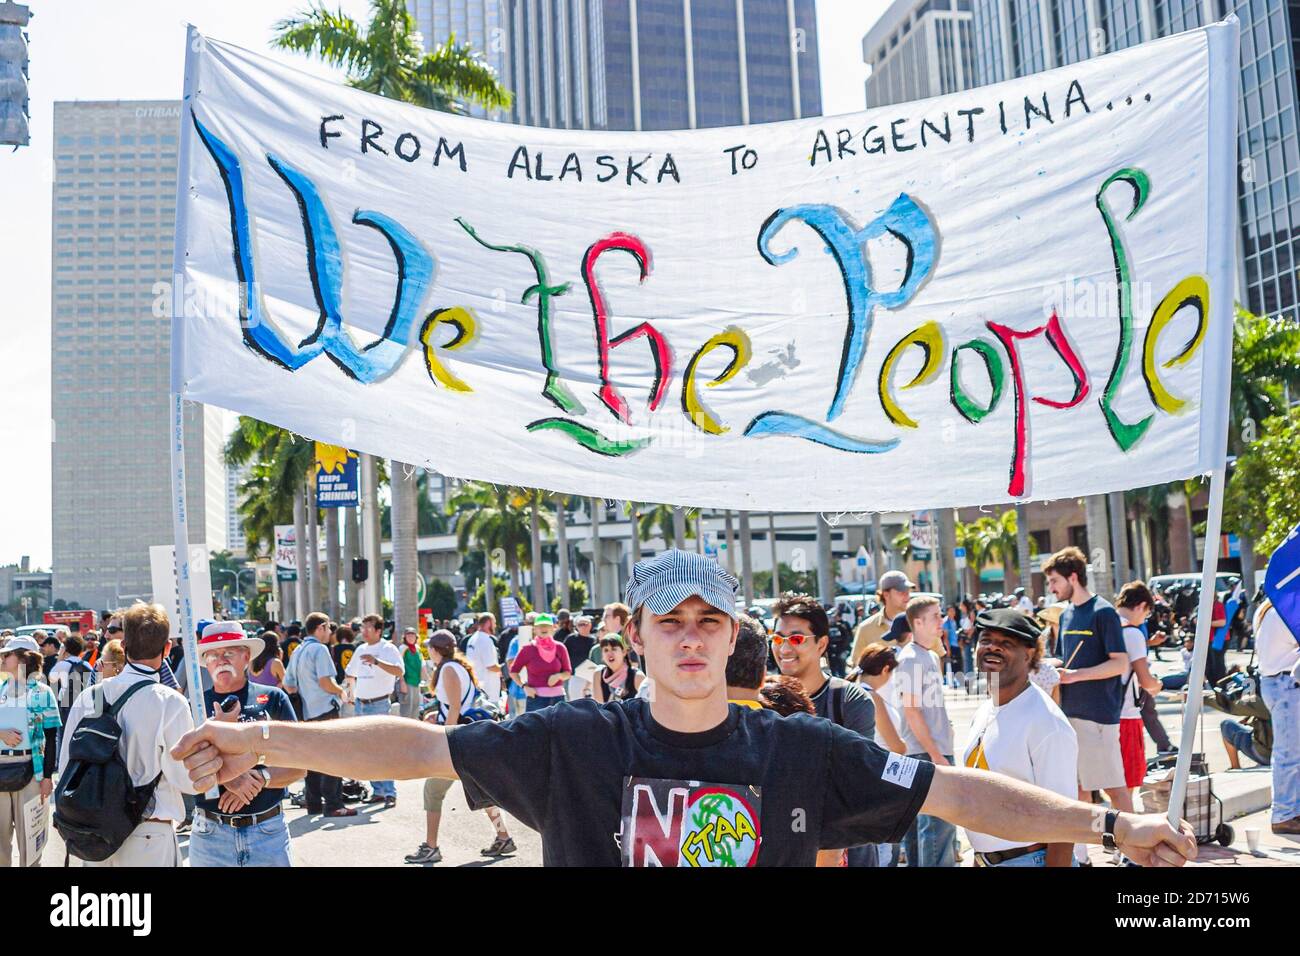 Miami Florida,Biscayne Boulevard,Free Trade Area of Americans Summit FTAA demonstrations,protester holding banner we the people, Stock Photo